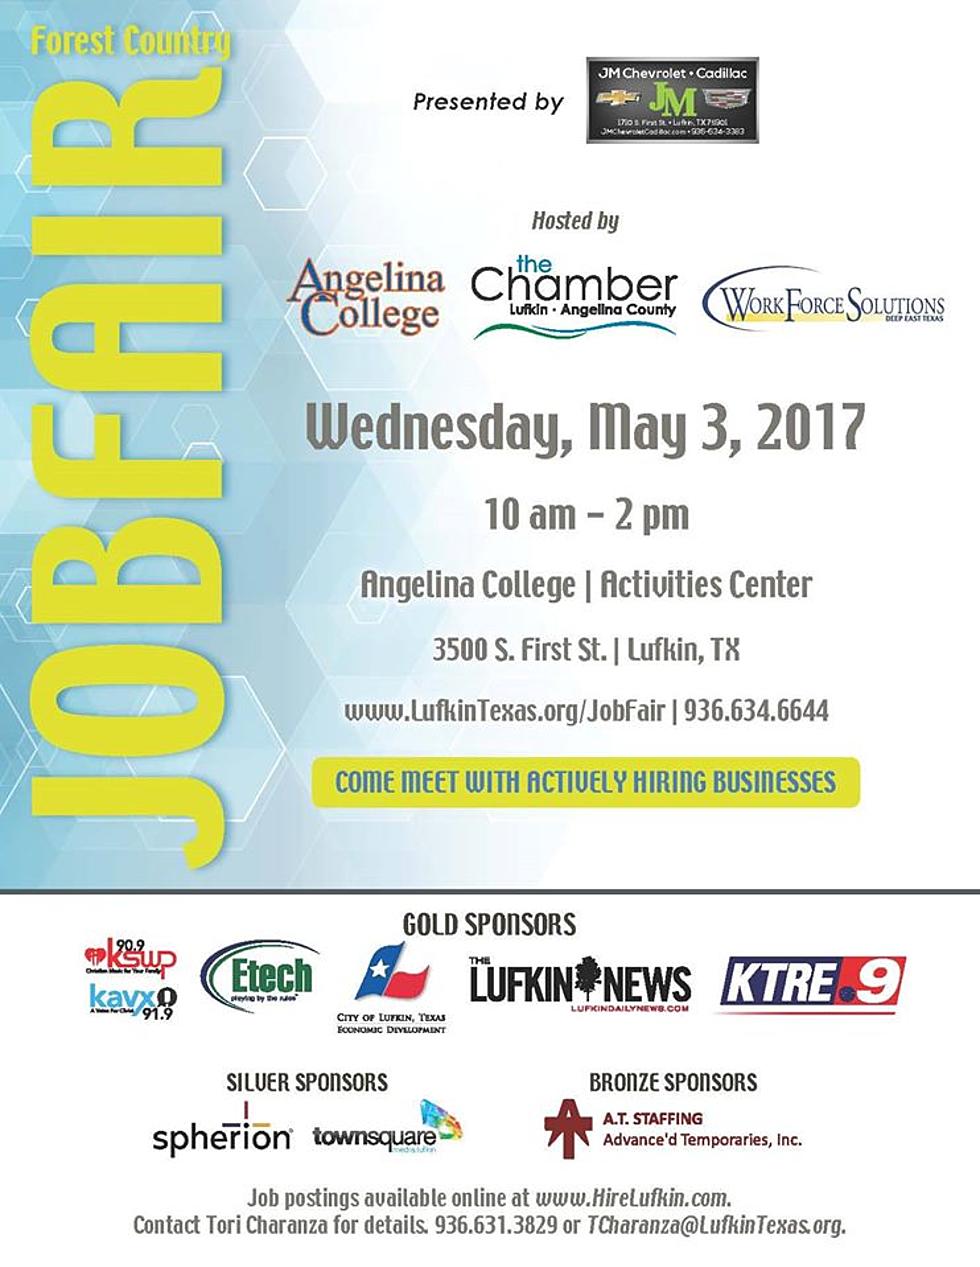 The Forest Country Job Fair is on Wednesday